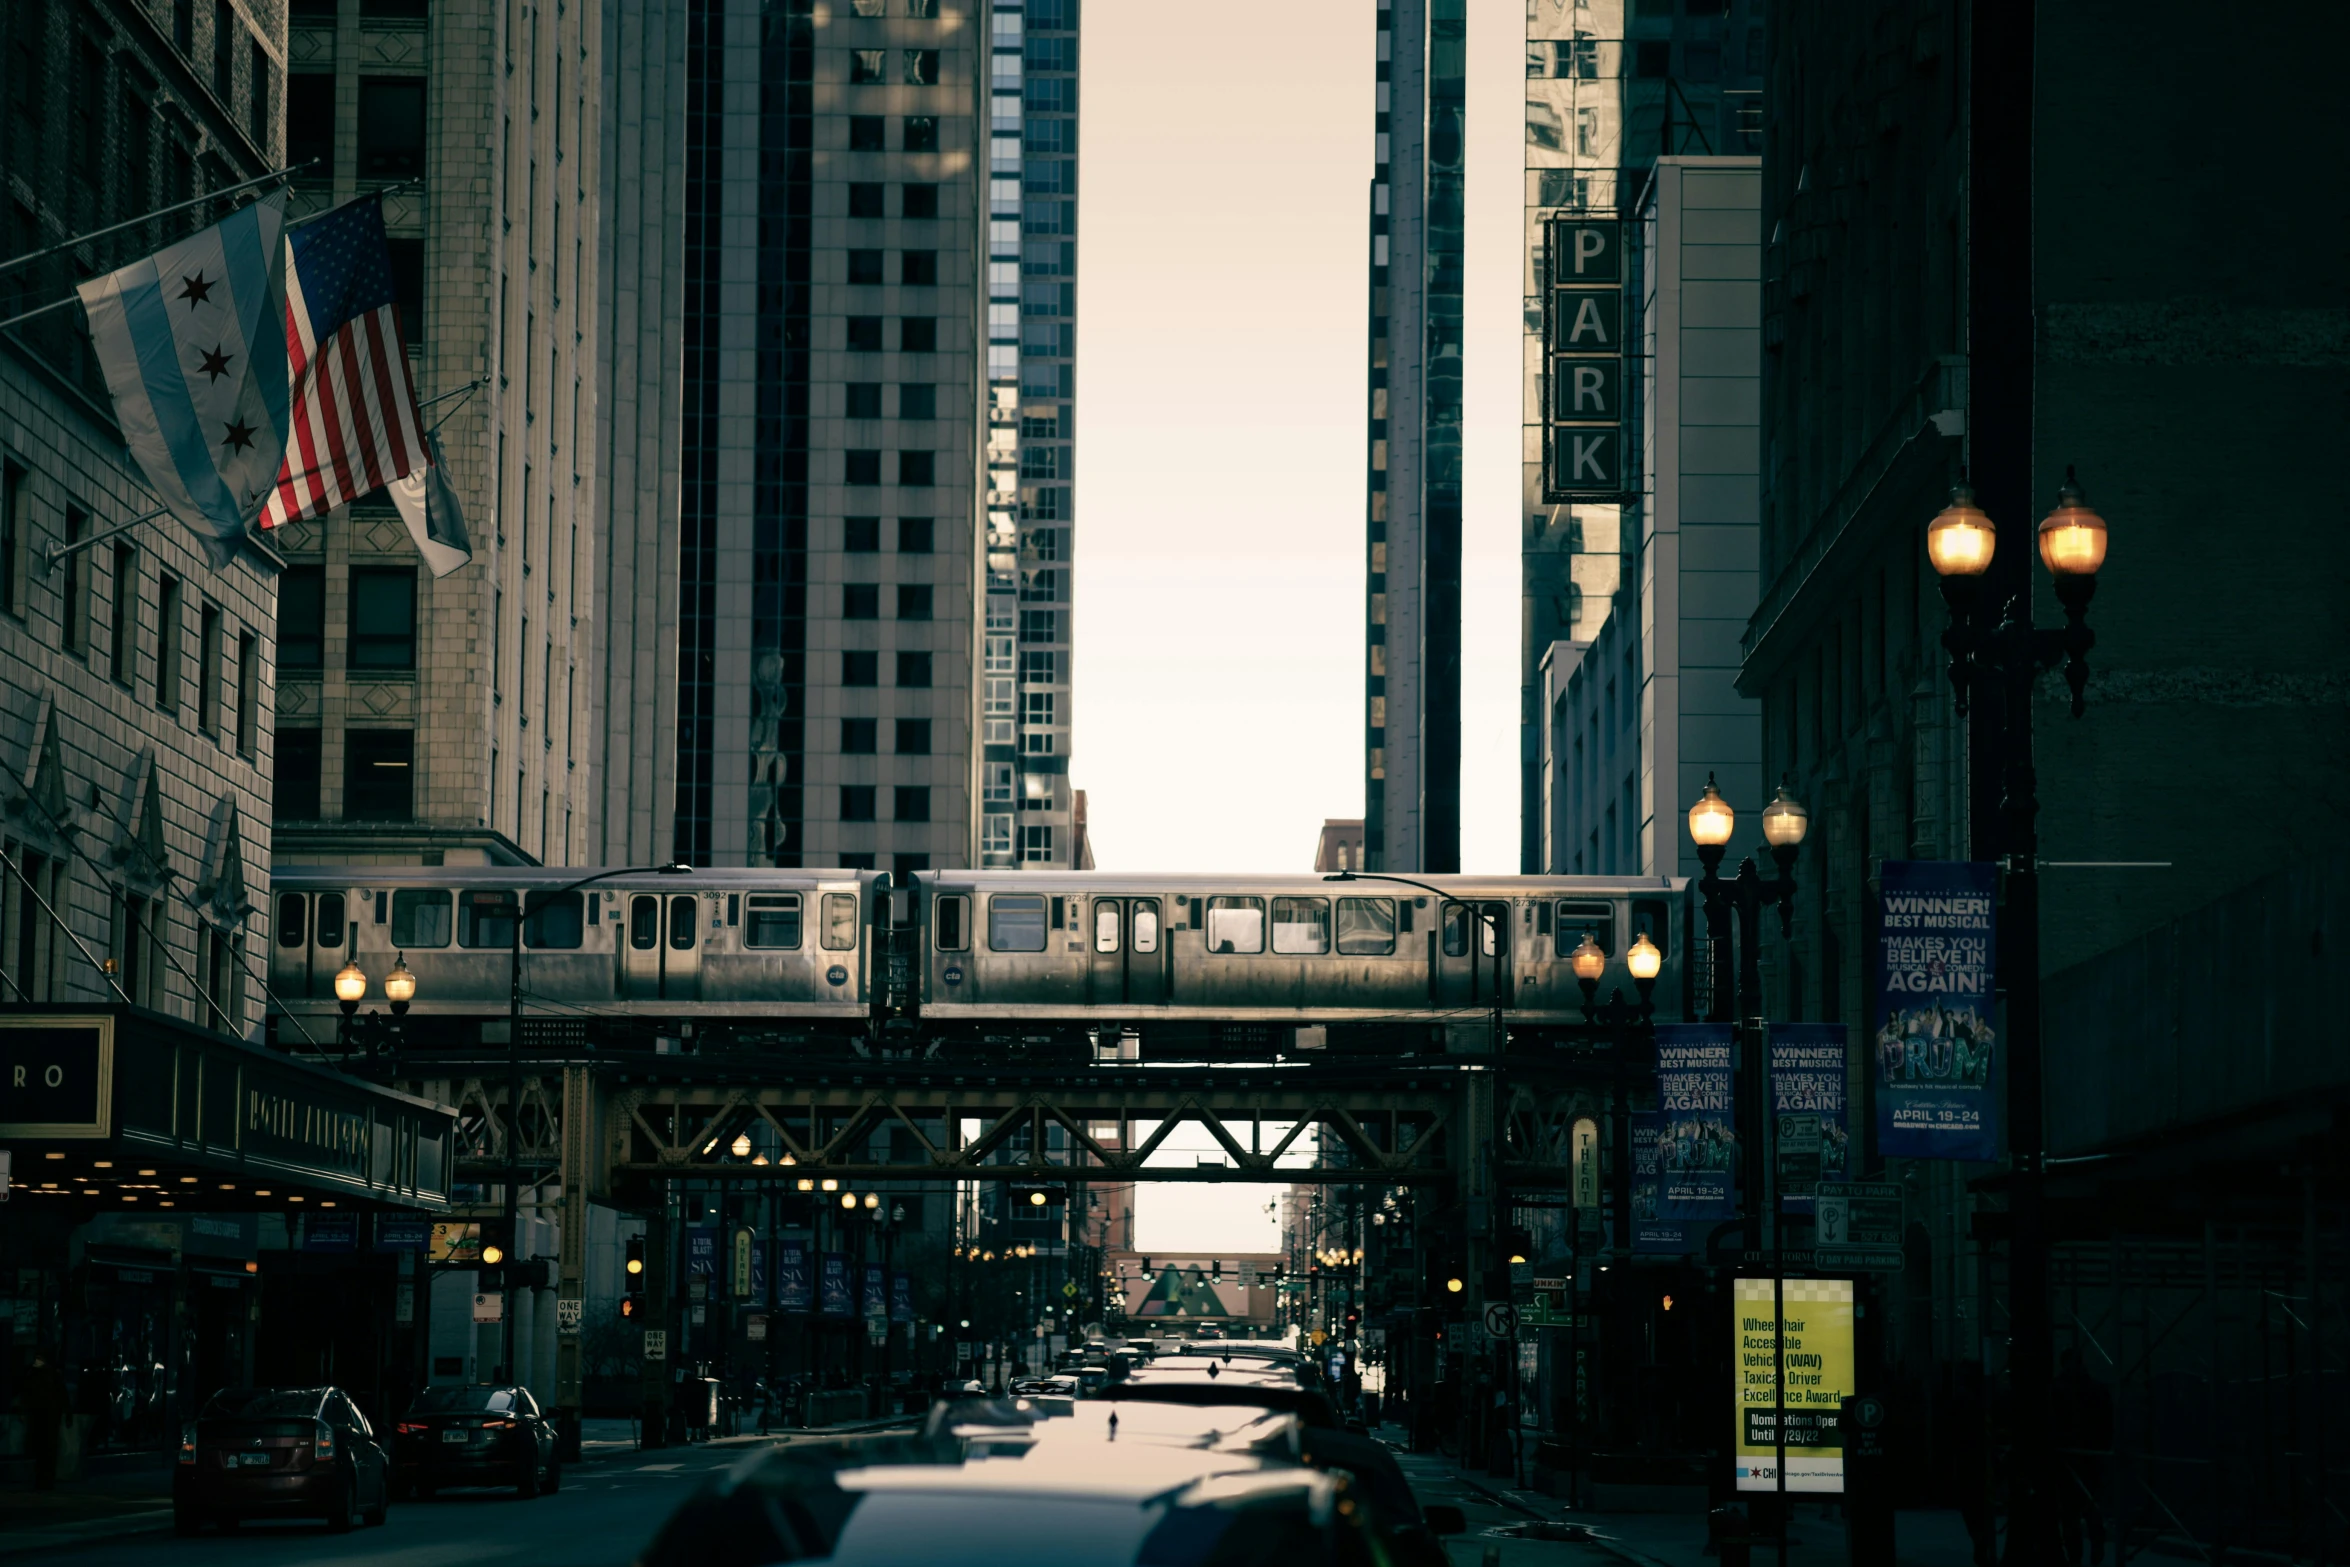 a train traveling down tracks on a city street